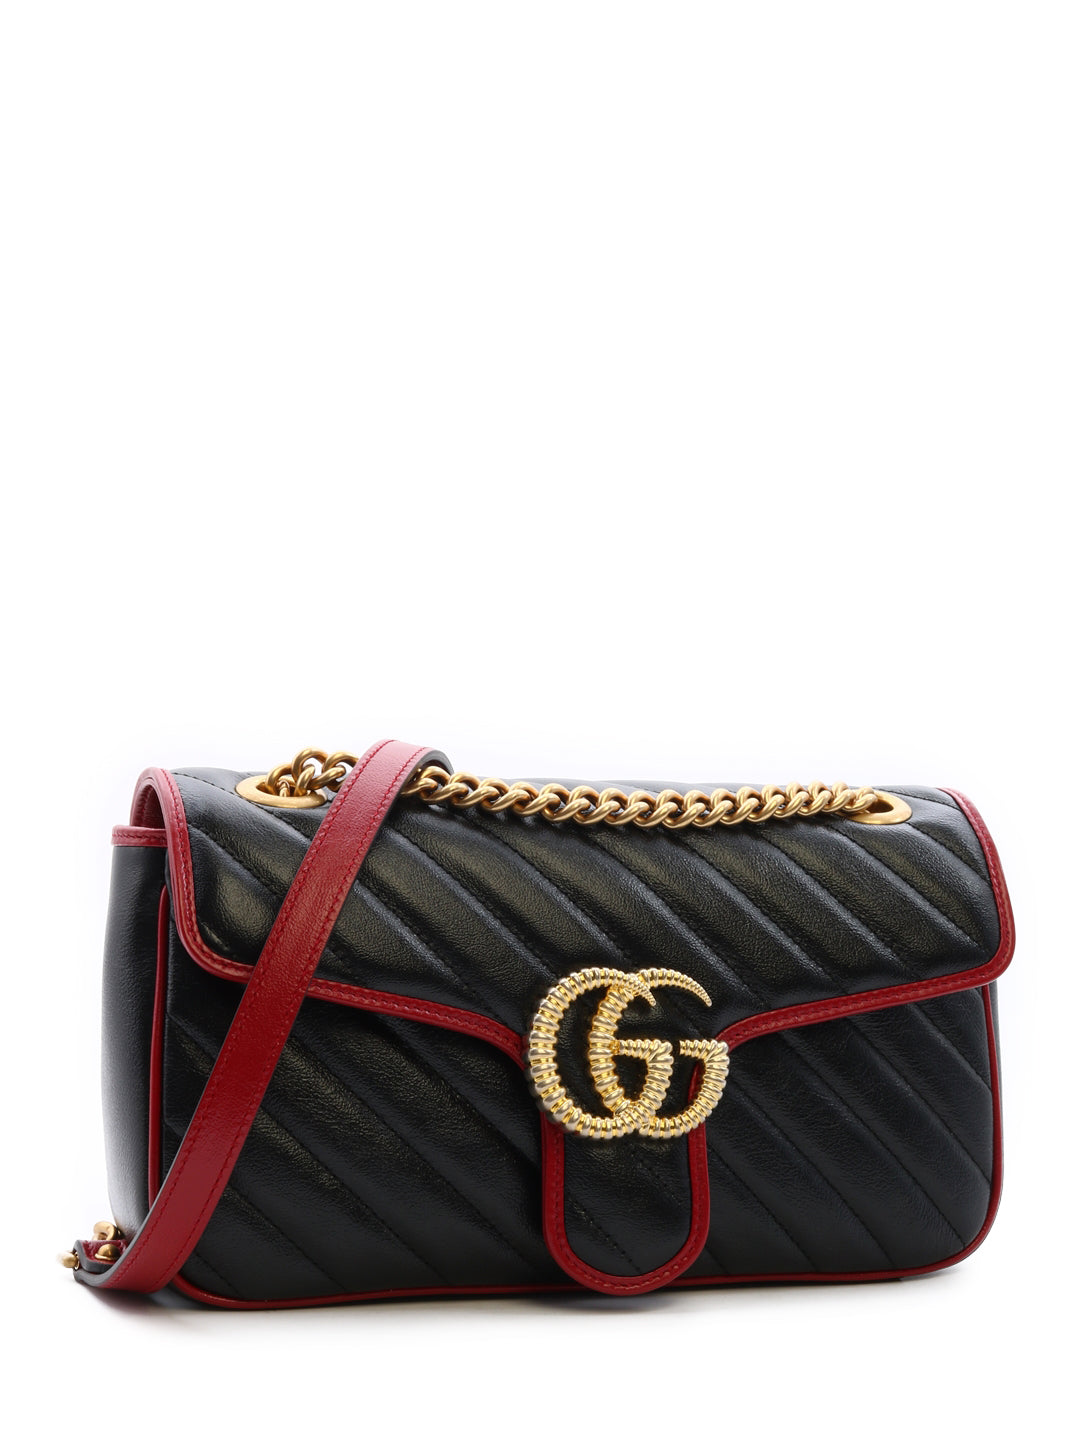 gg marmont small shoulder bag price